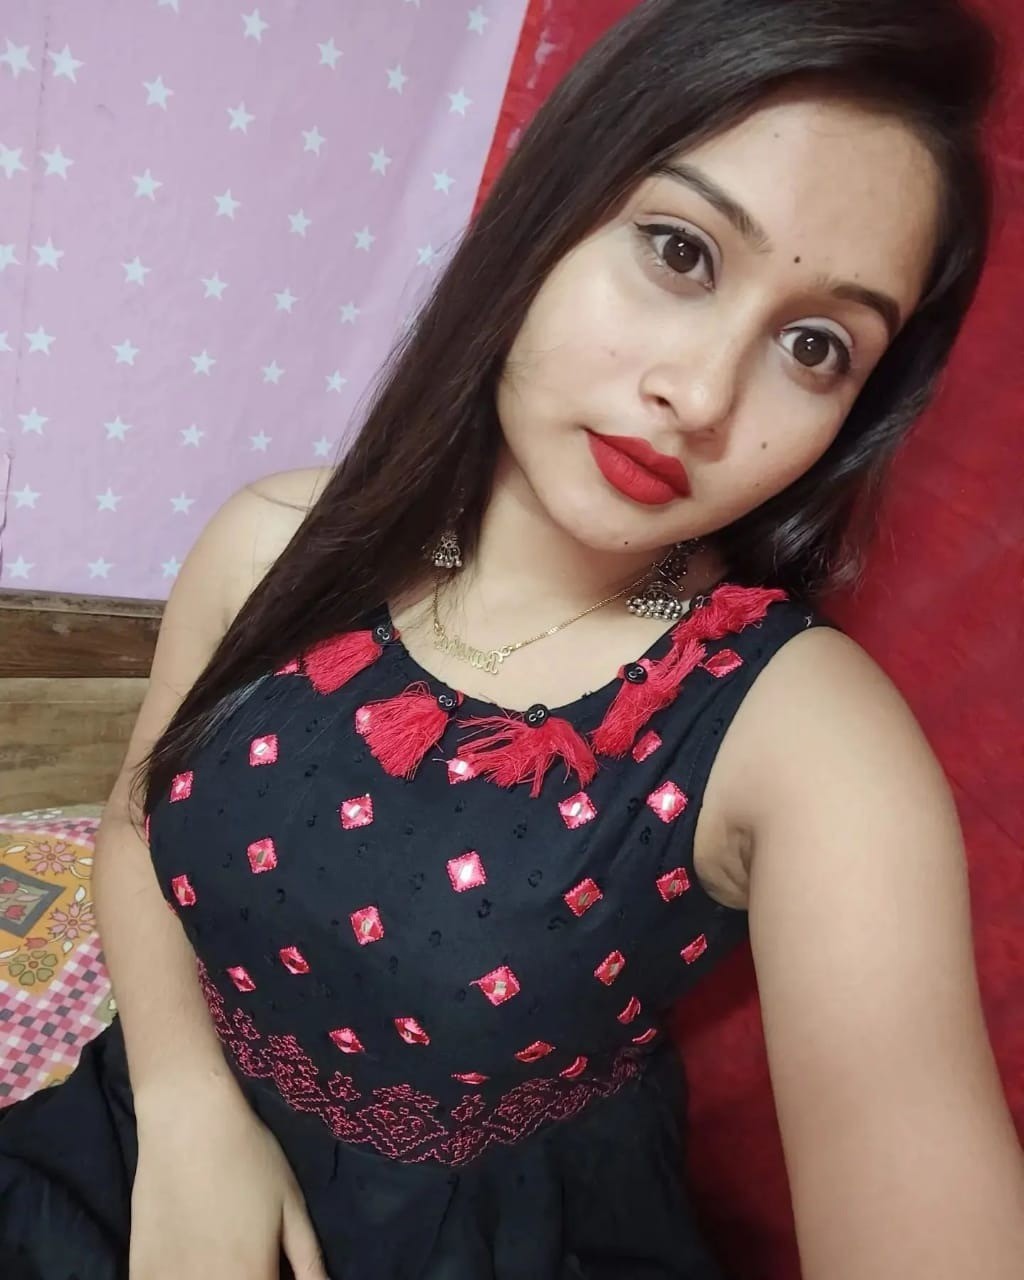 Call girl in Ainthapali 